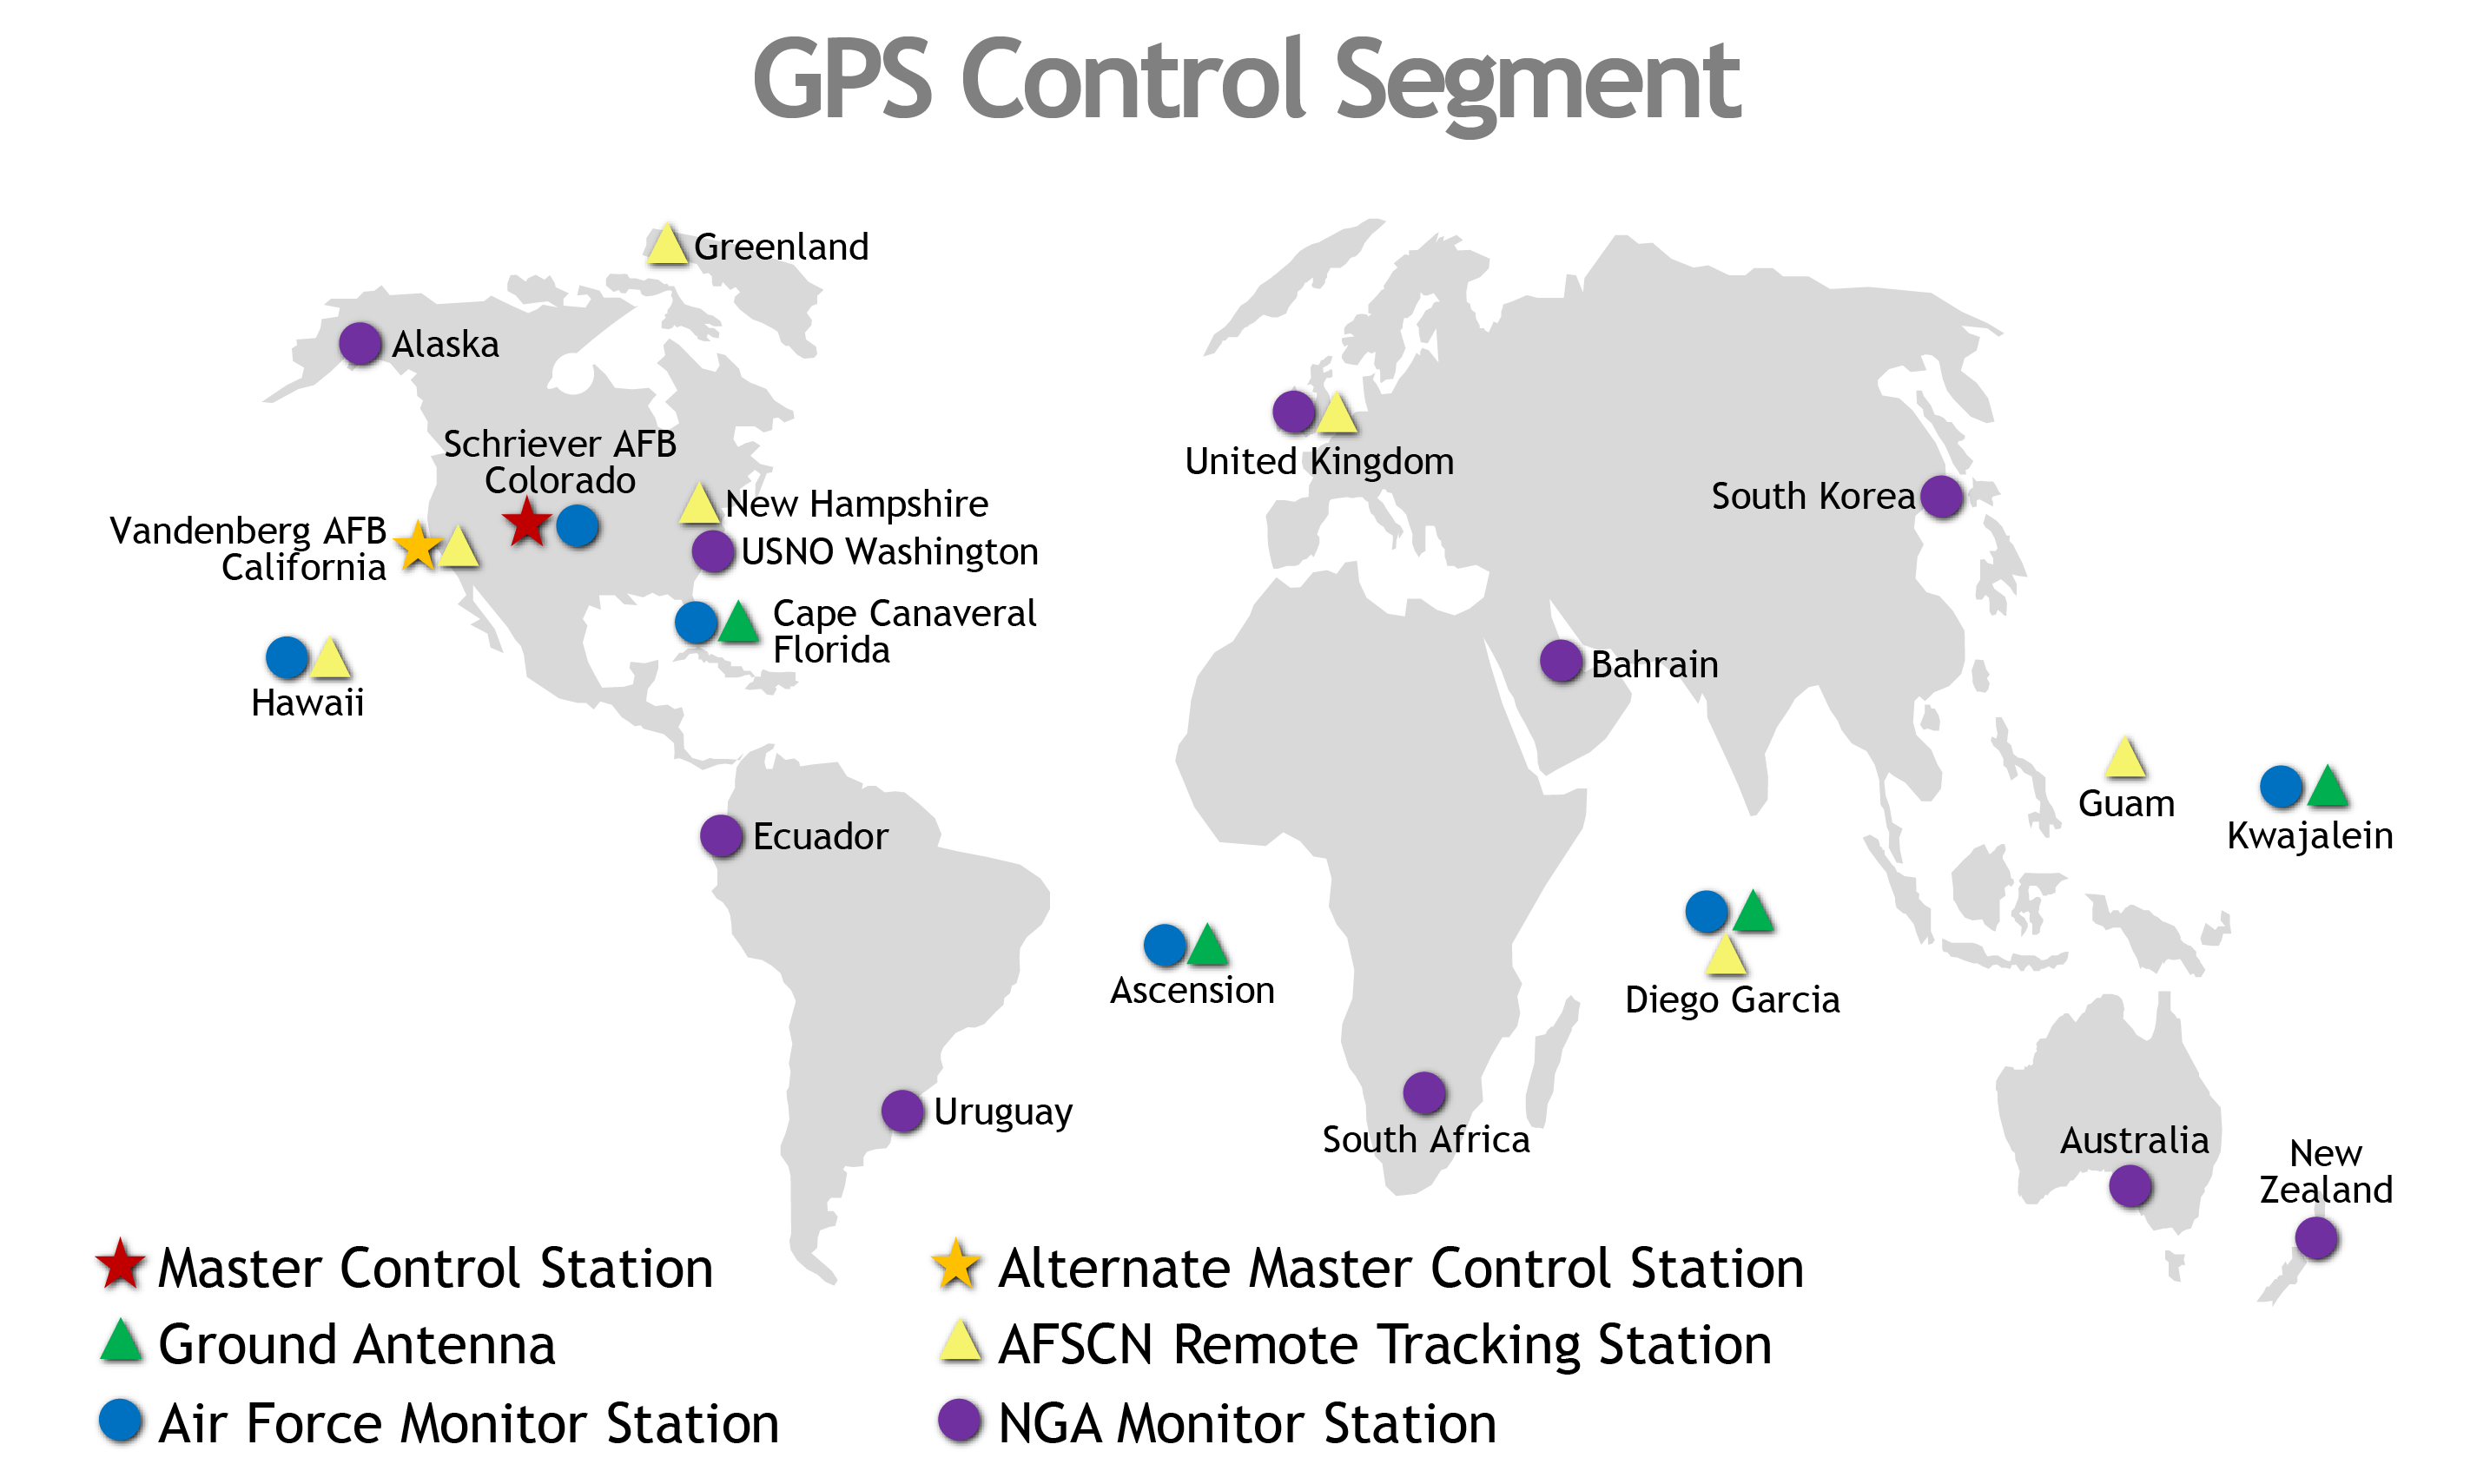 World map of GPSS control segment. UK has a NGA Monitor Station and AFSCN Remote tracking station. Bahrain, South Korea, Australia, New Zealand, Uruguay, Alaska and South Africa has NGA Monitor Station. Colorado has Master Control Station. Florida and Kwajalin have Grout Antenna. Hawaii, Colorado, Florida, Ascension have air force monitor station.